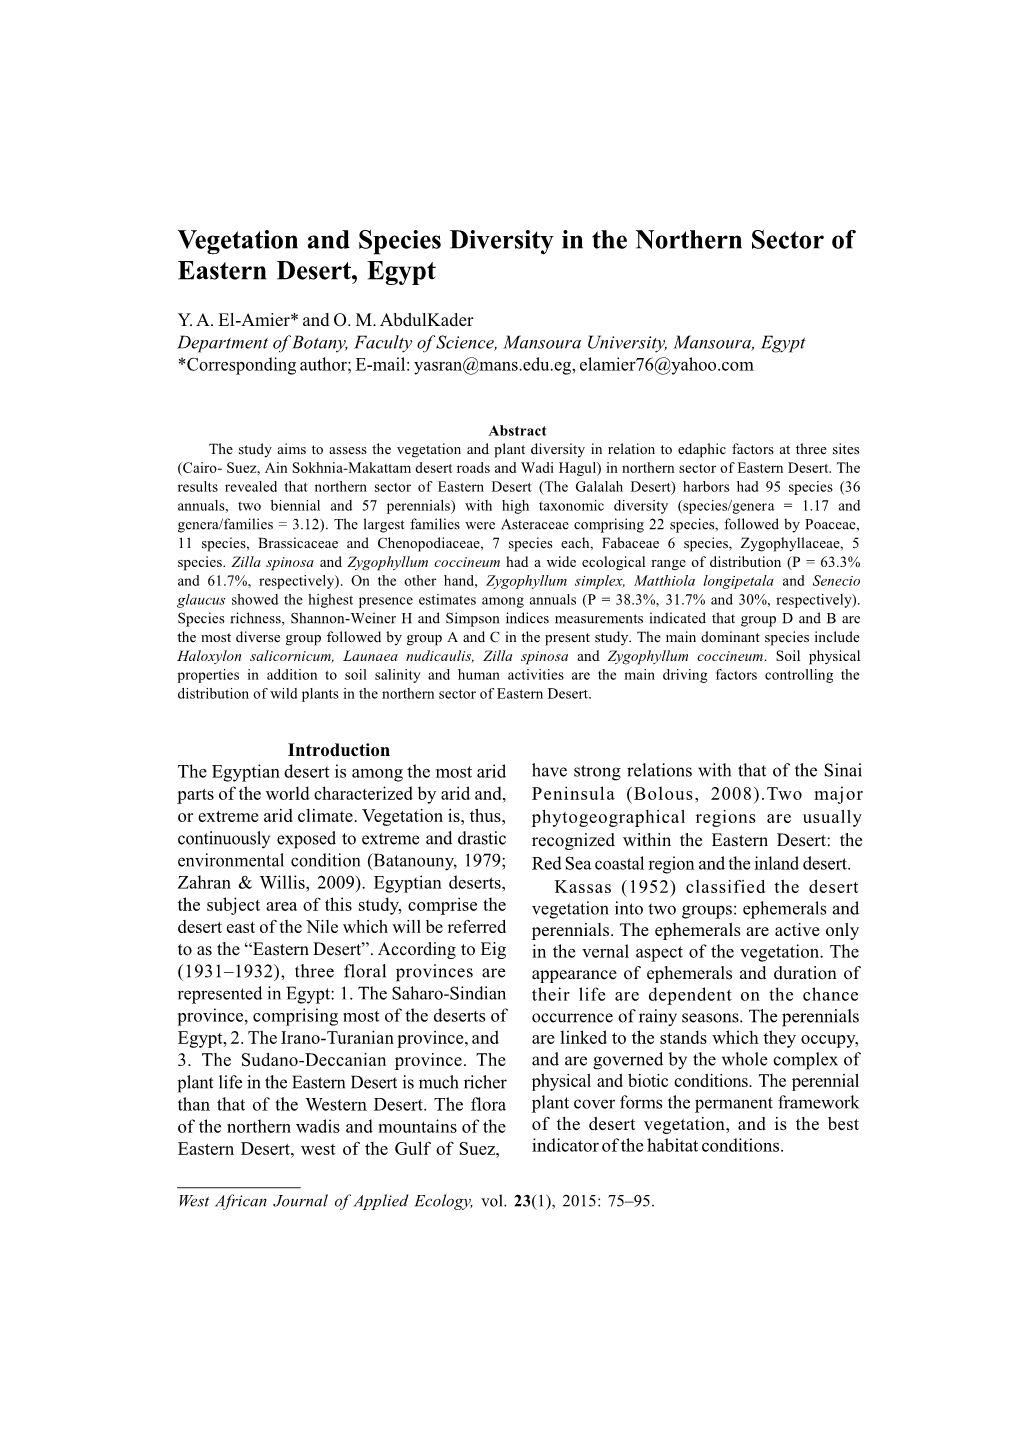 Vegetation and Species Diversity in the Northern Sector 77